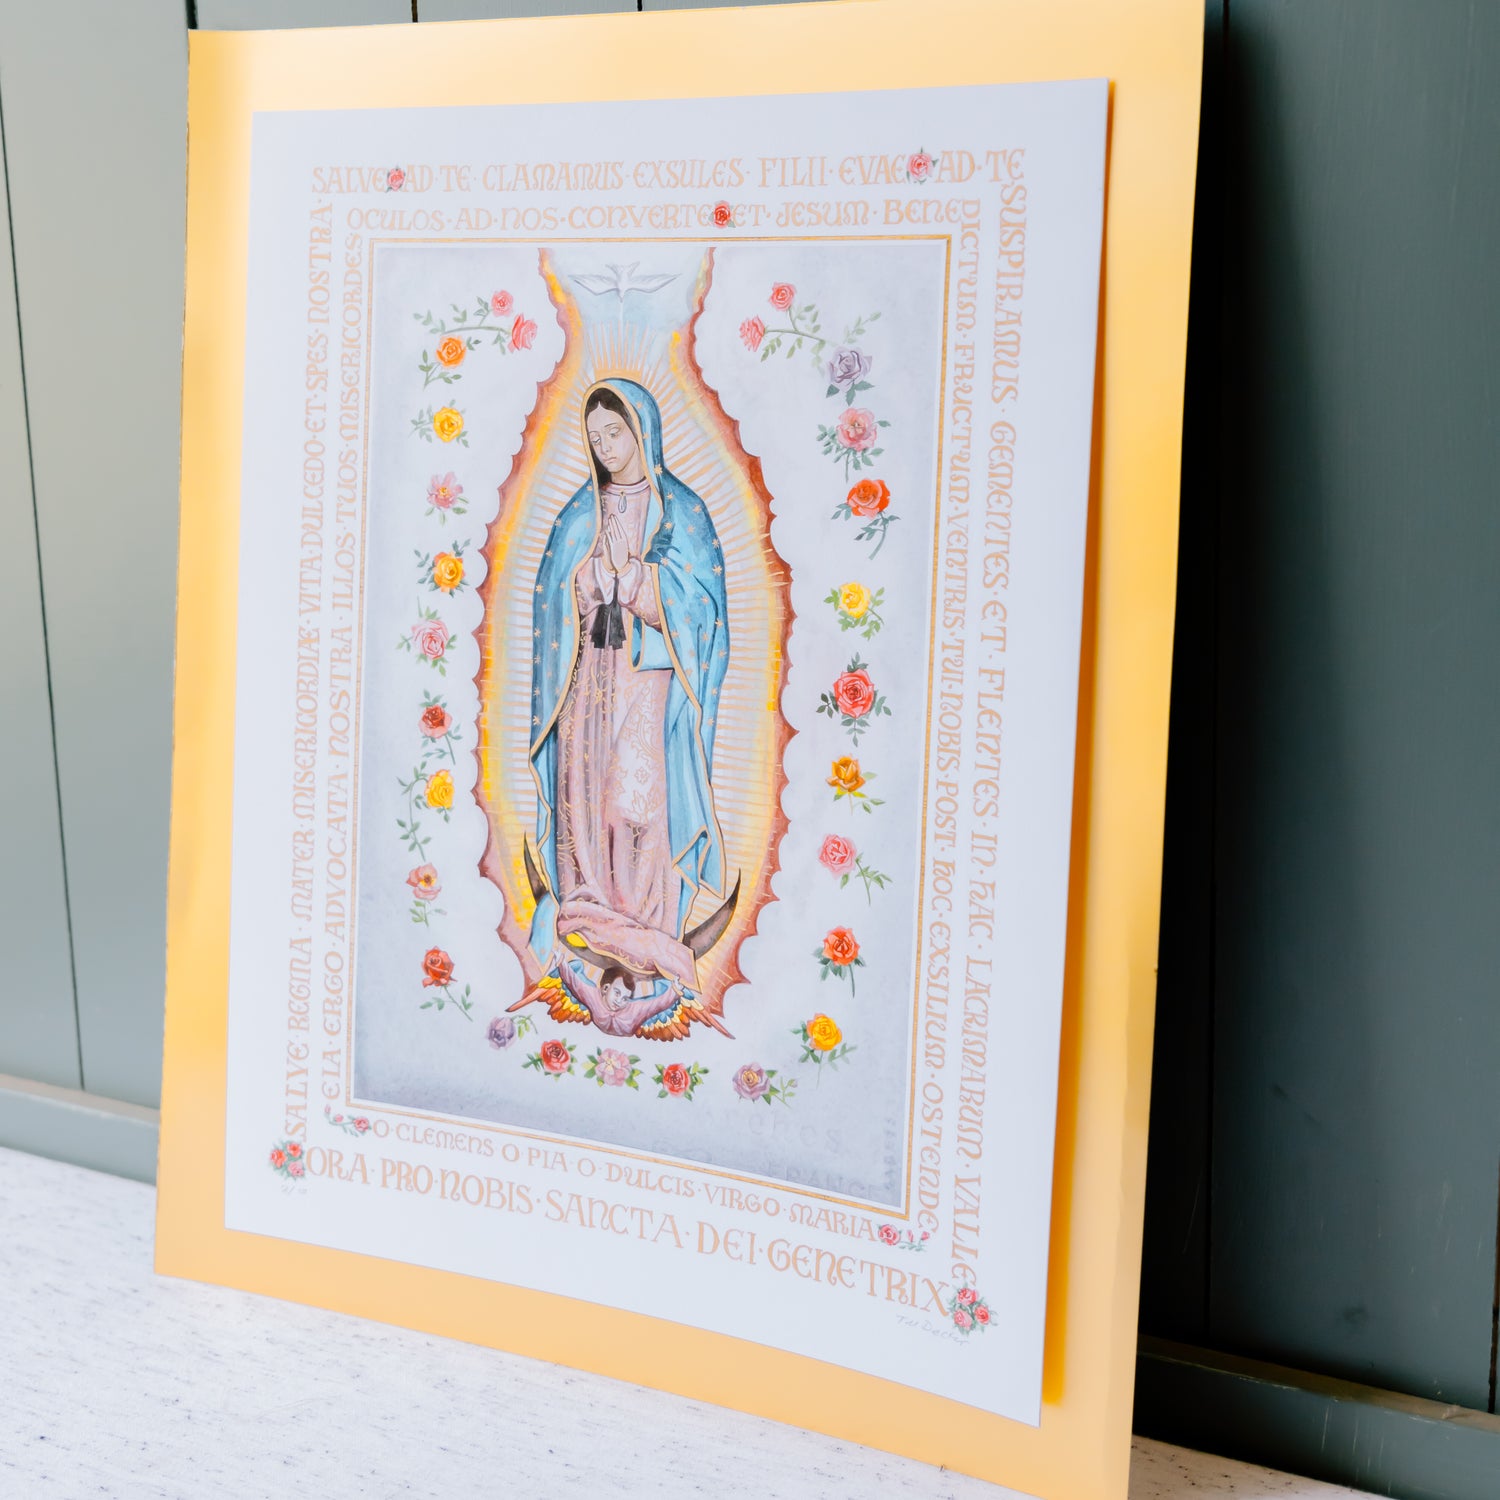 Our Lady of Guadalupe Unique Giclee Print - 13”x 16”